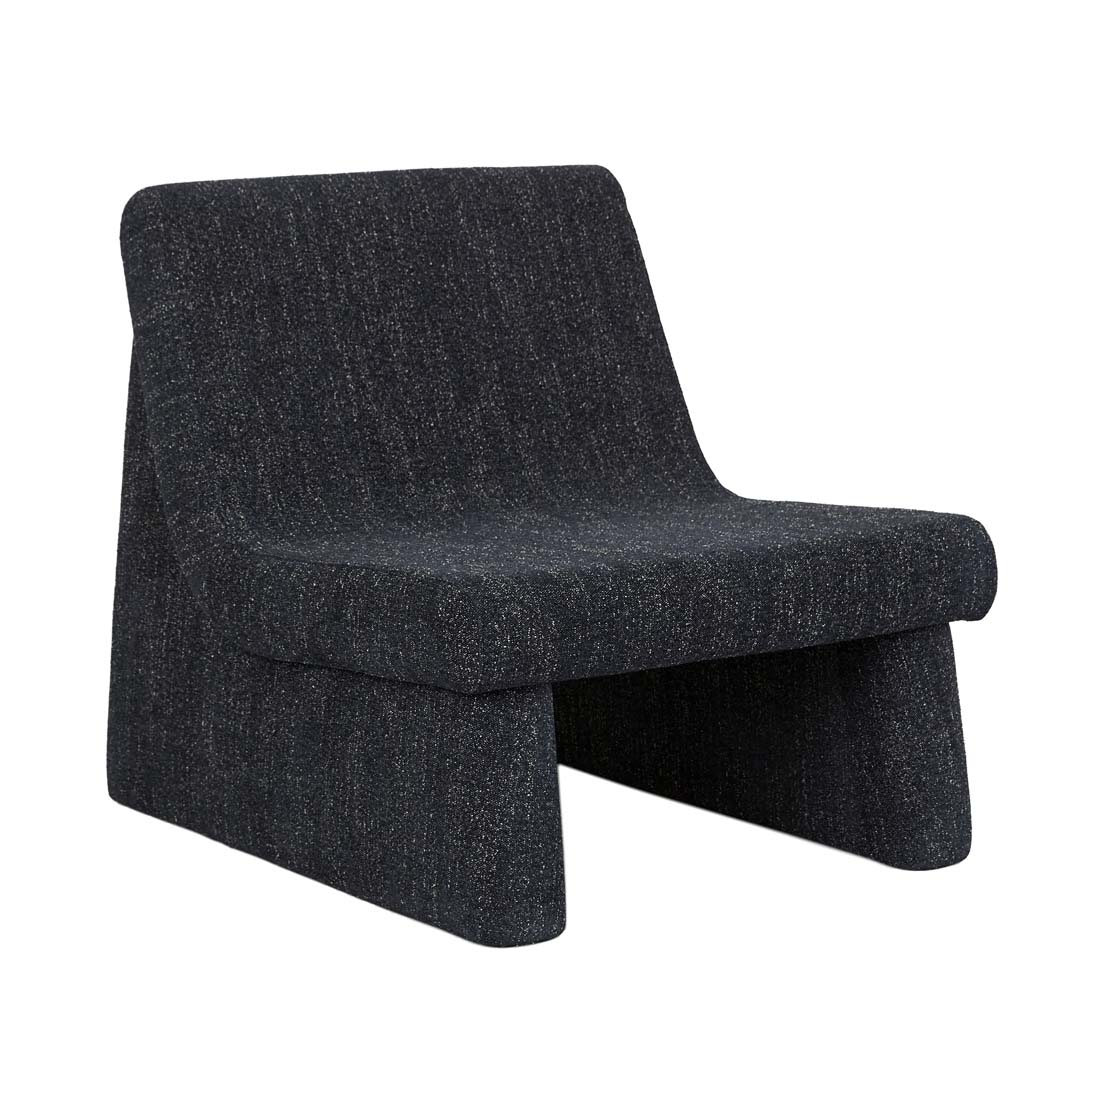 Vela Occasional Chair image 11